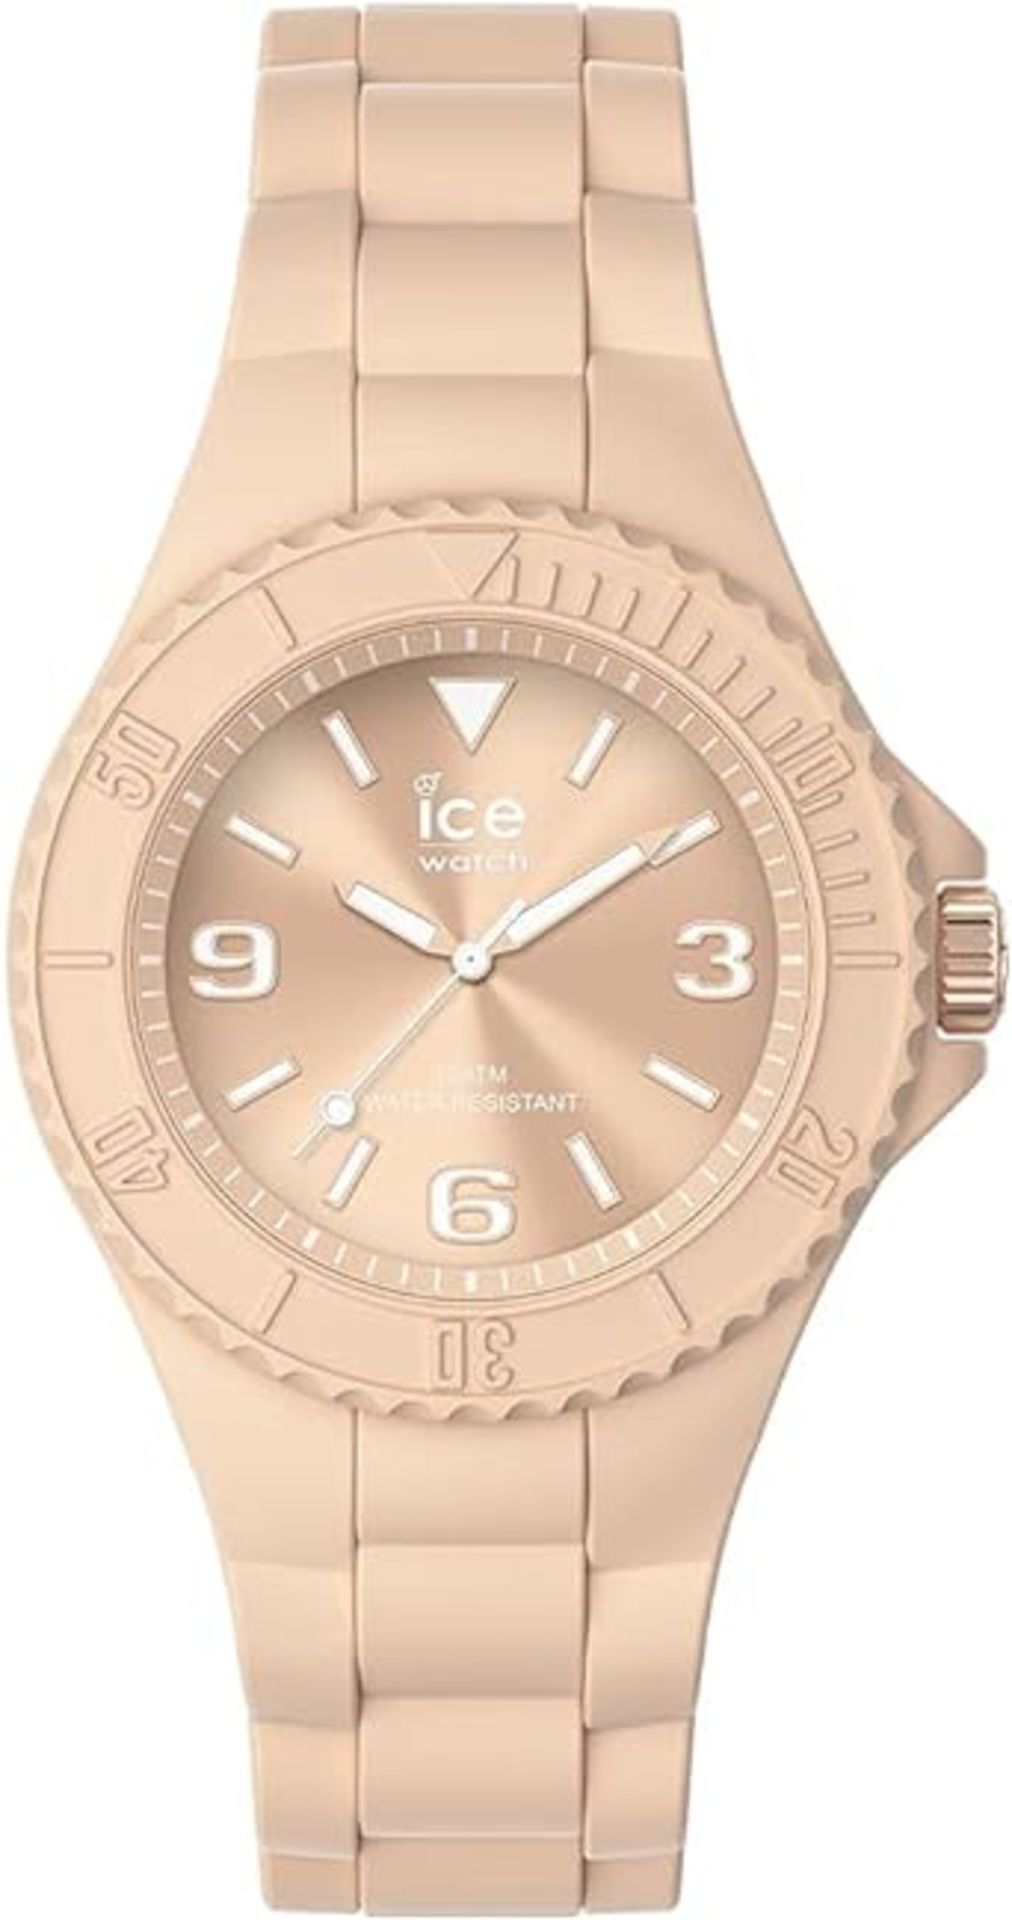 4x BRAND NEW ICE-WATCH Ice Generation Womans Watch. NUDE. RRP £55 EACH. (OFC149). Small 35 mm